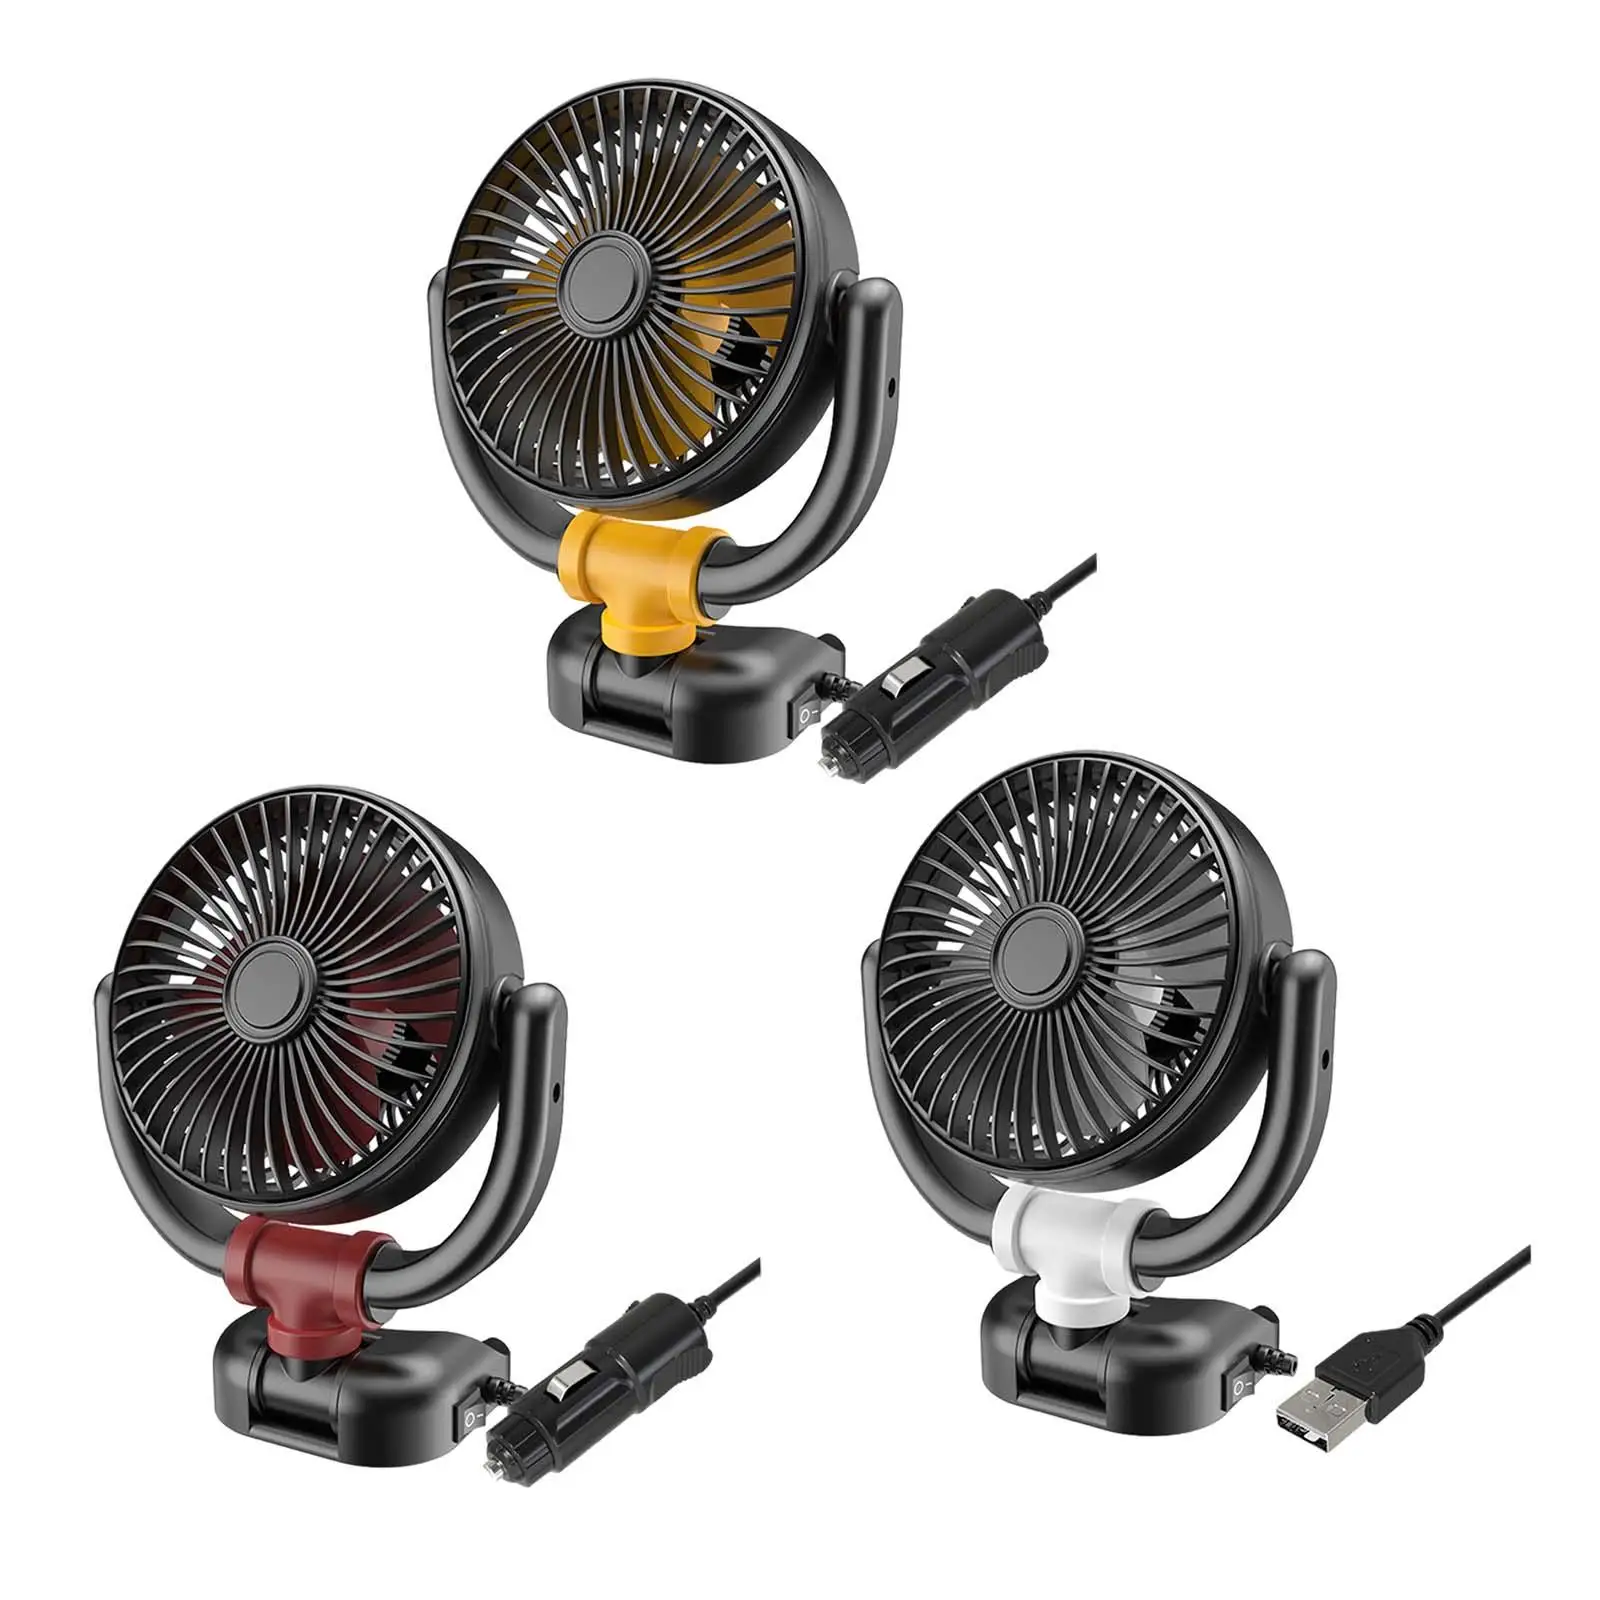 

Vehicle Car Electric Cooling Fan Single Head Compact Strong Wind 360° Rotatable Air Circulator for Van Boat Accessory